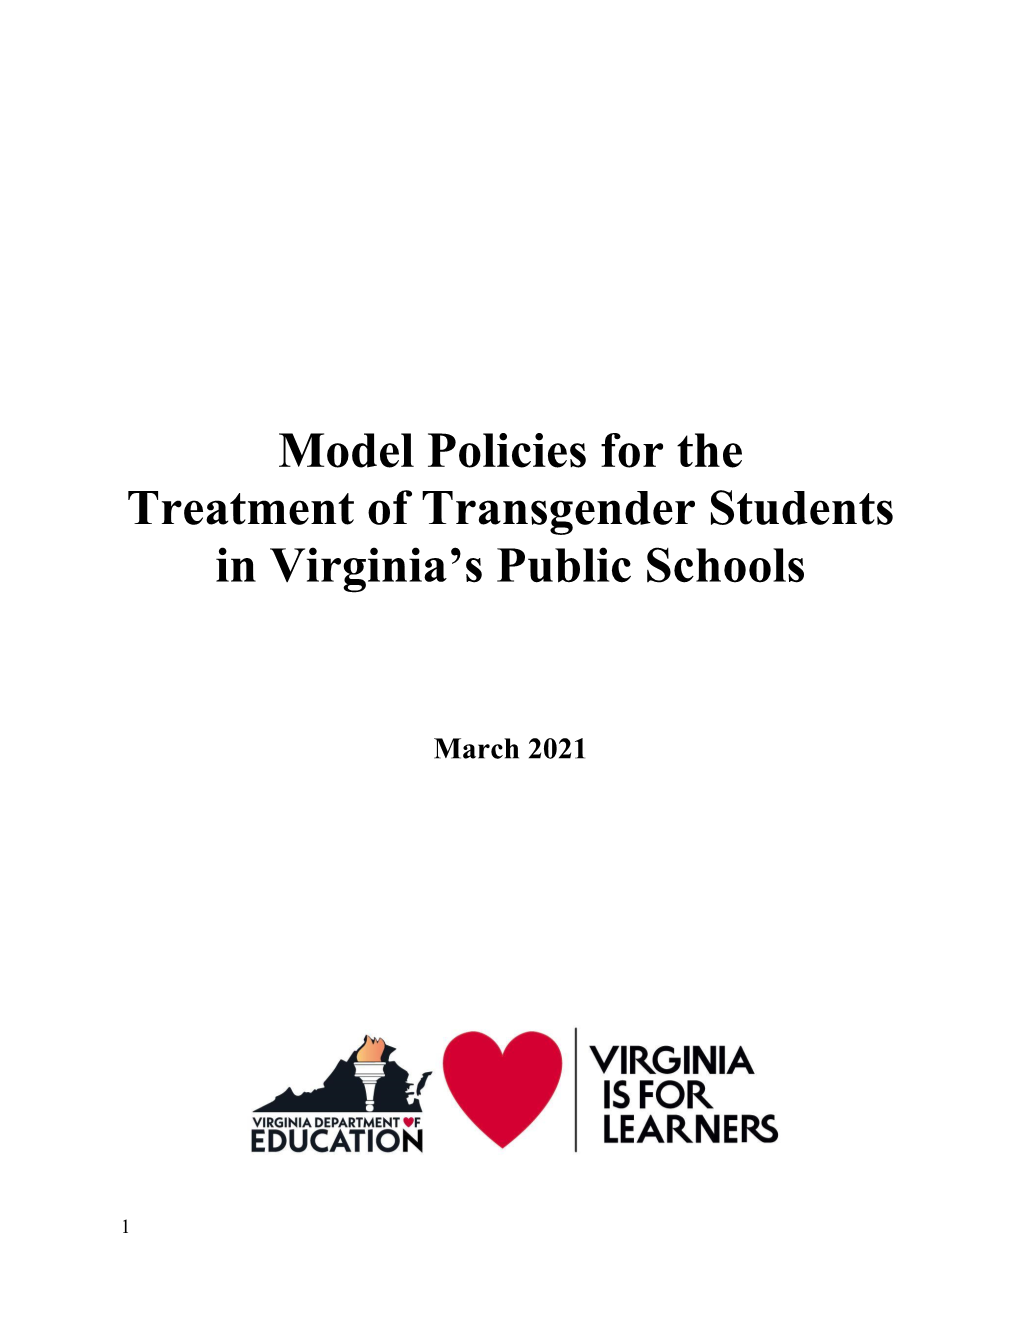 Model Policies for the Treatment of Transgender Students in Virgiinia